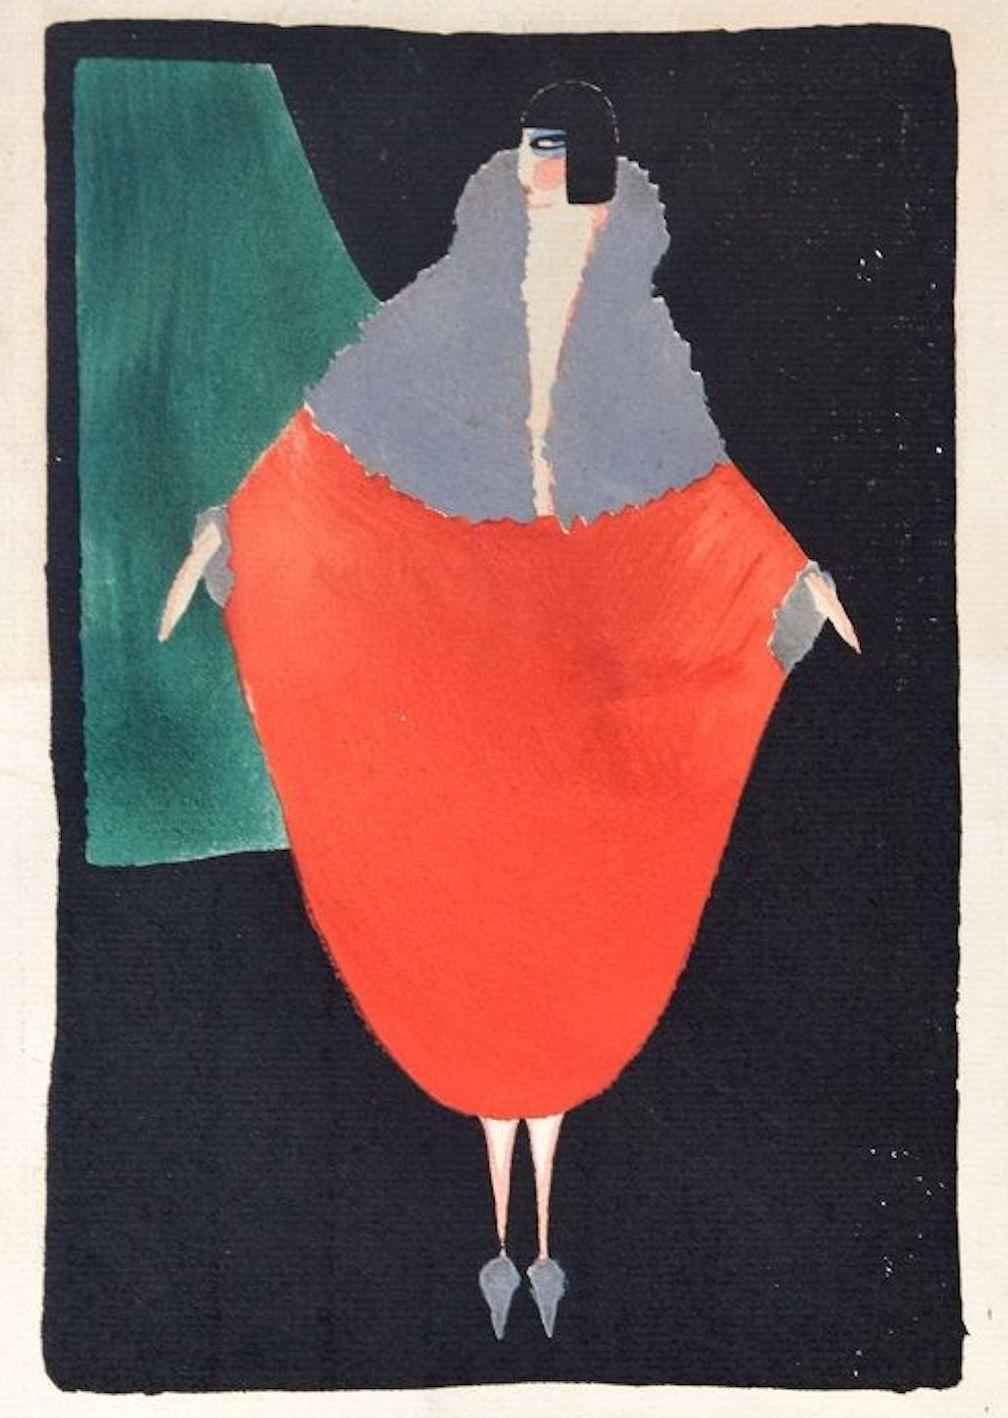 Unknown Figurative Painting – Red Woman / Original Woodcut hand colored in Tempera on Paper - Art Deco - 1920s